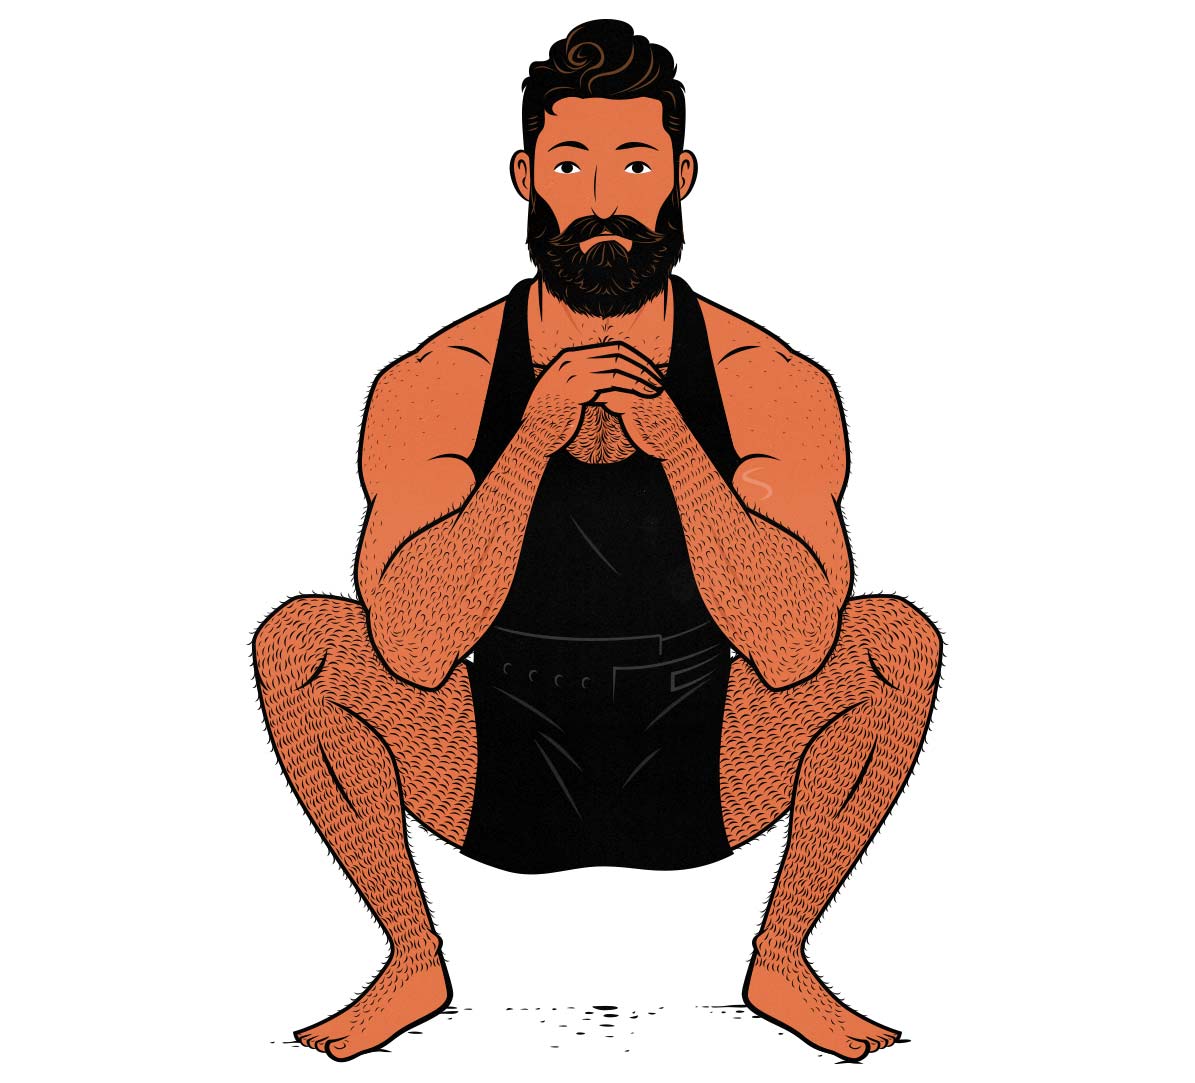 Illustration of a man doing air squats to build muscle.